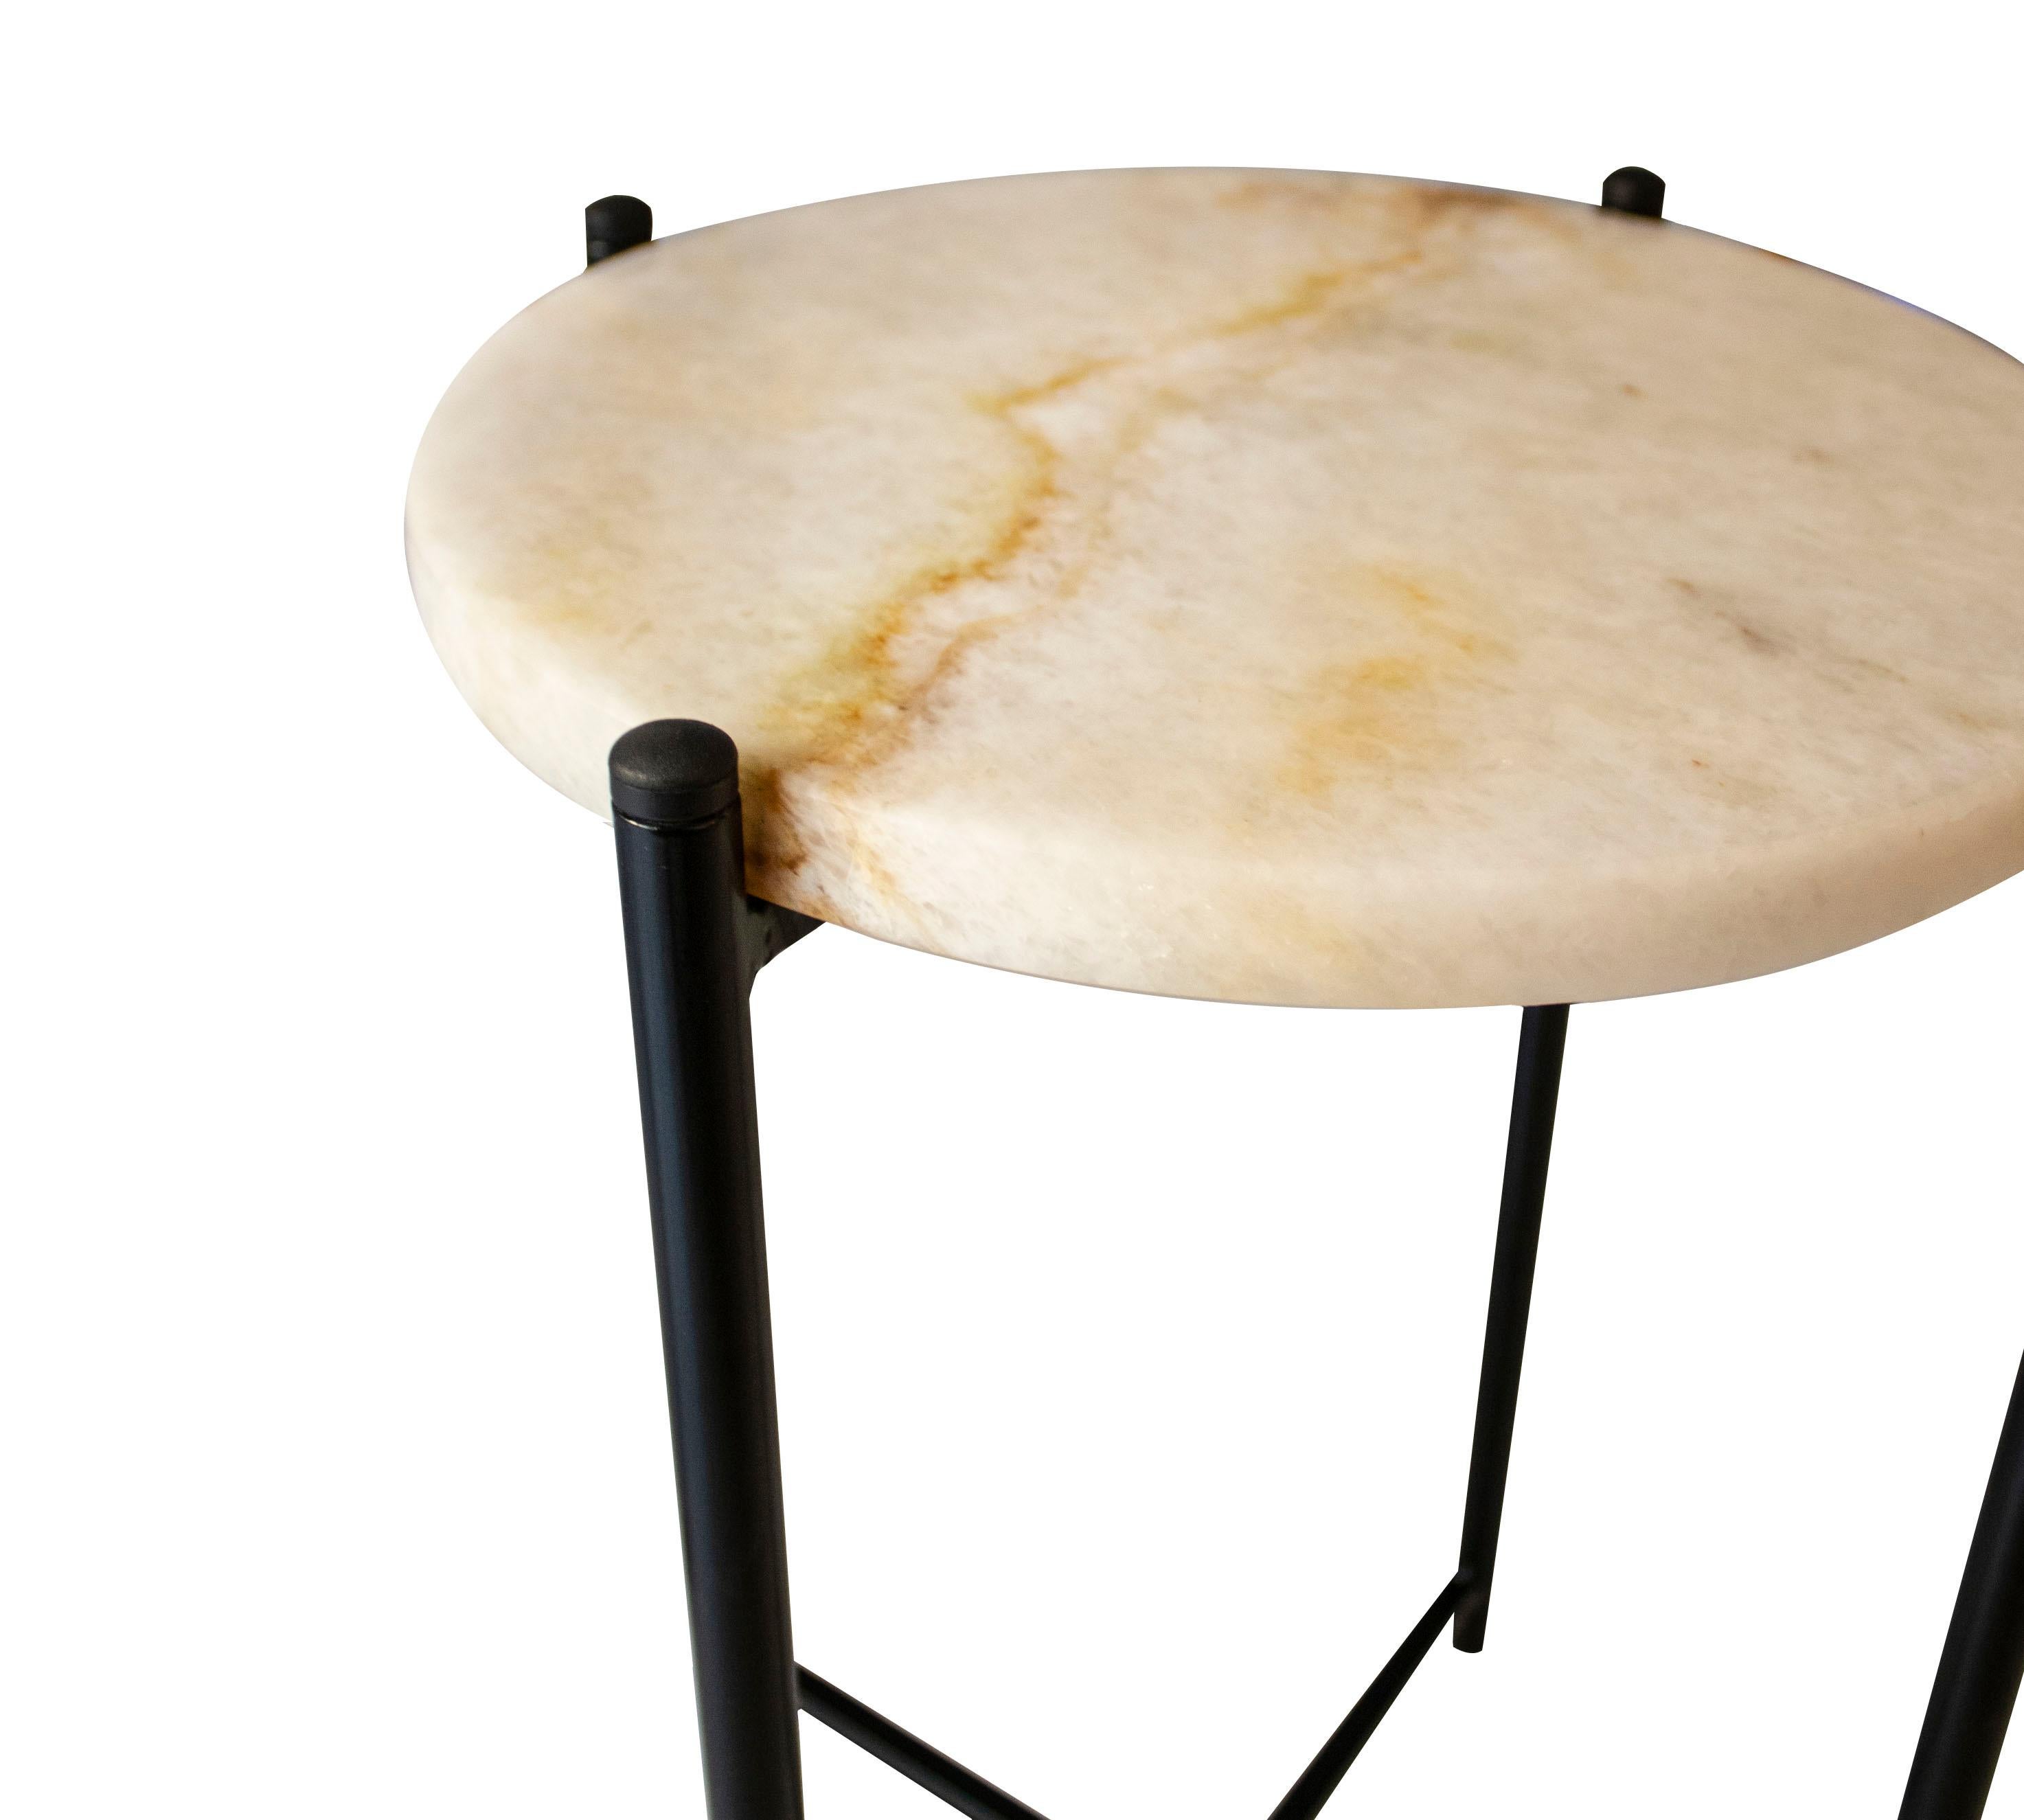 Metal Contemporary Side Table Designed in Iron and White Onyx, Spain, 2023 For Sale